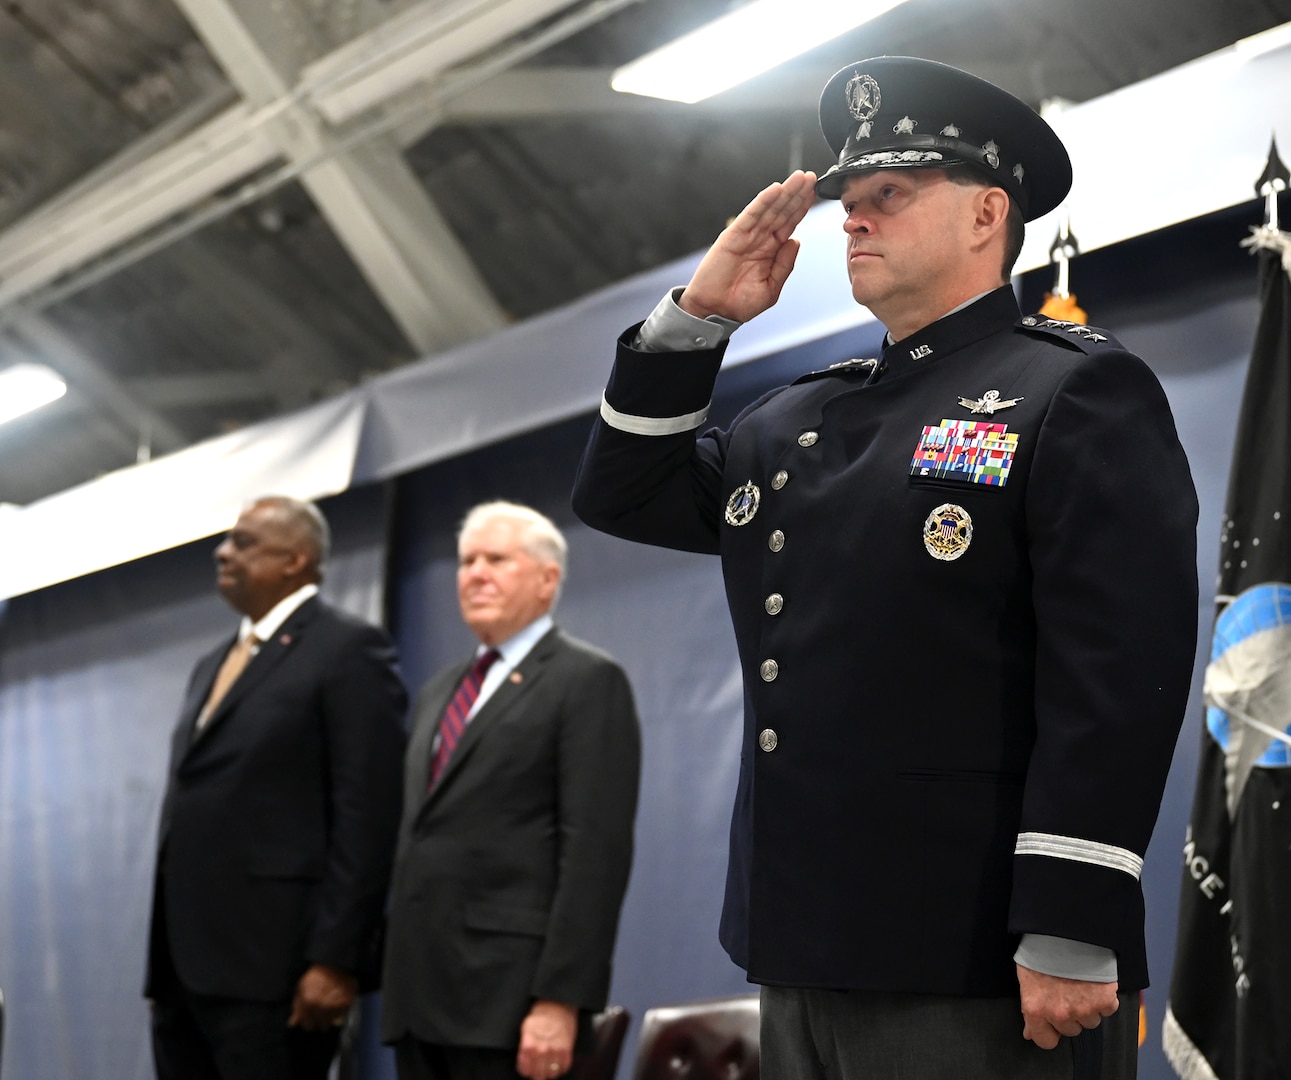 Secretary of Defense Lloyd Austin III (left) and Secretary of the Air Force Frank Kendall in the background, Chief of Space Operations Gen. Chance Saltzman renders a salute during his transition ceremony at Joint Base Andrews, Md., Nov. 2, 2022. Gen. Chance Saltzman relieved Gen. John W. “Jay” Raymond as the second CSO, the senior uniformed officer heading the Space Force. (U.S. Air Force photo by Andy Morataya)